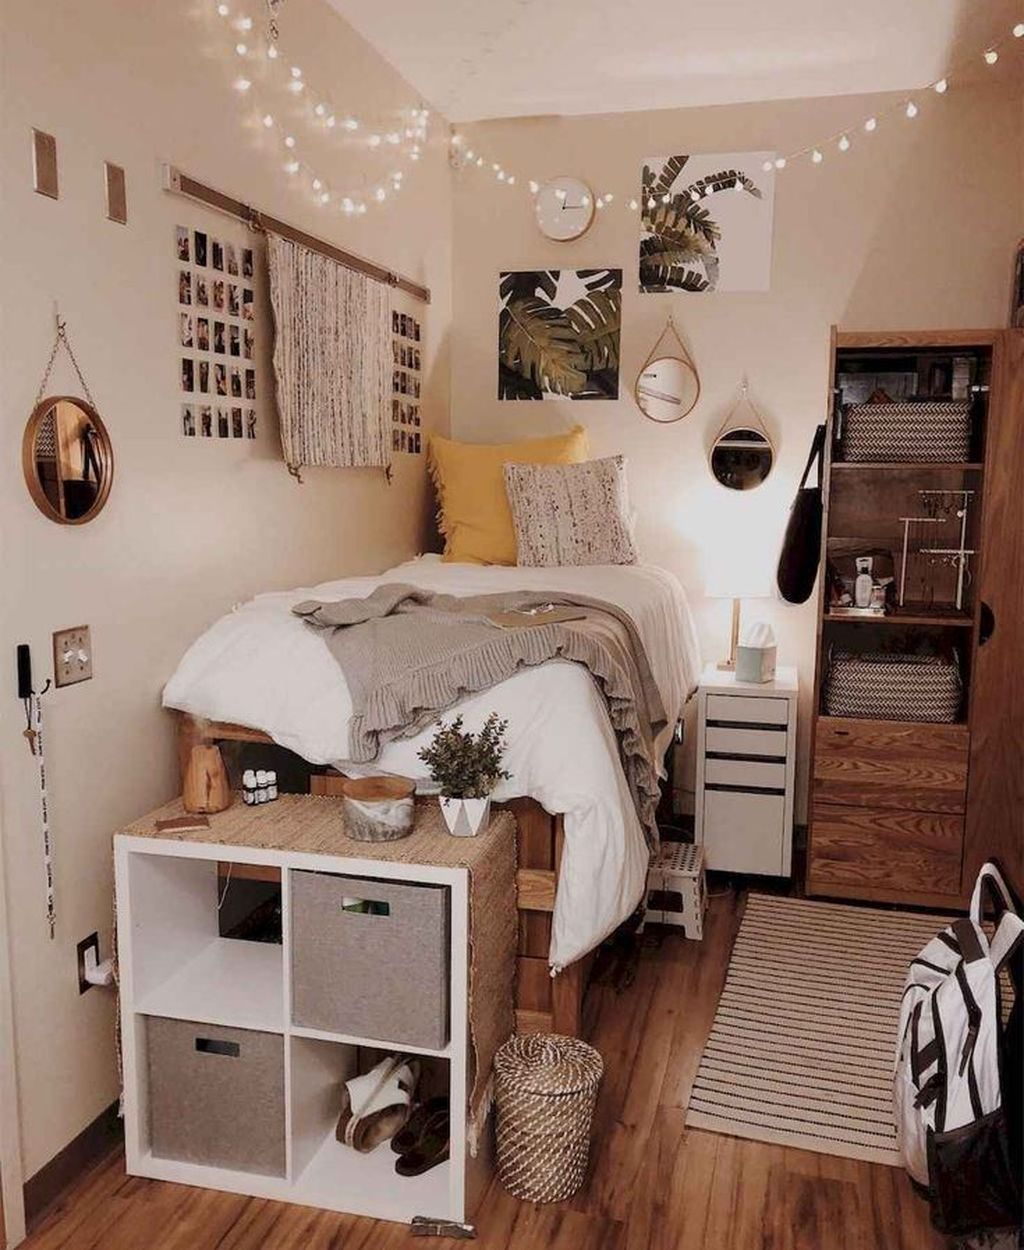 How can I decorate my room with simple things?